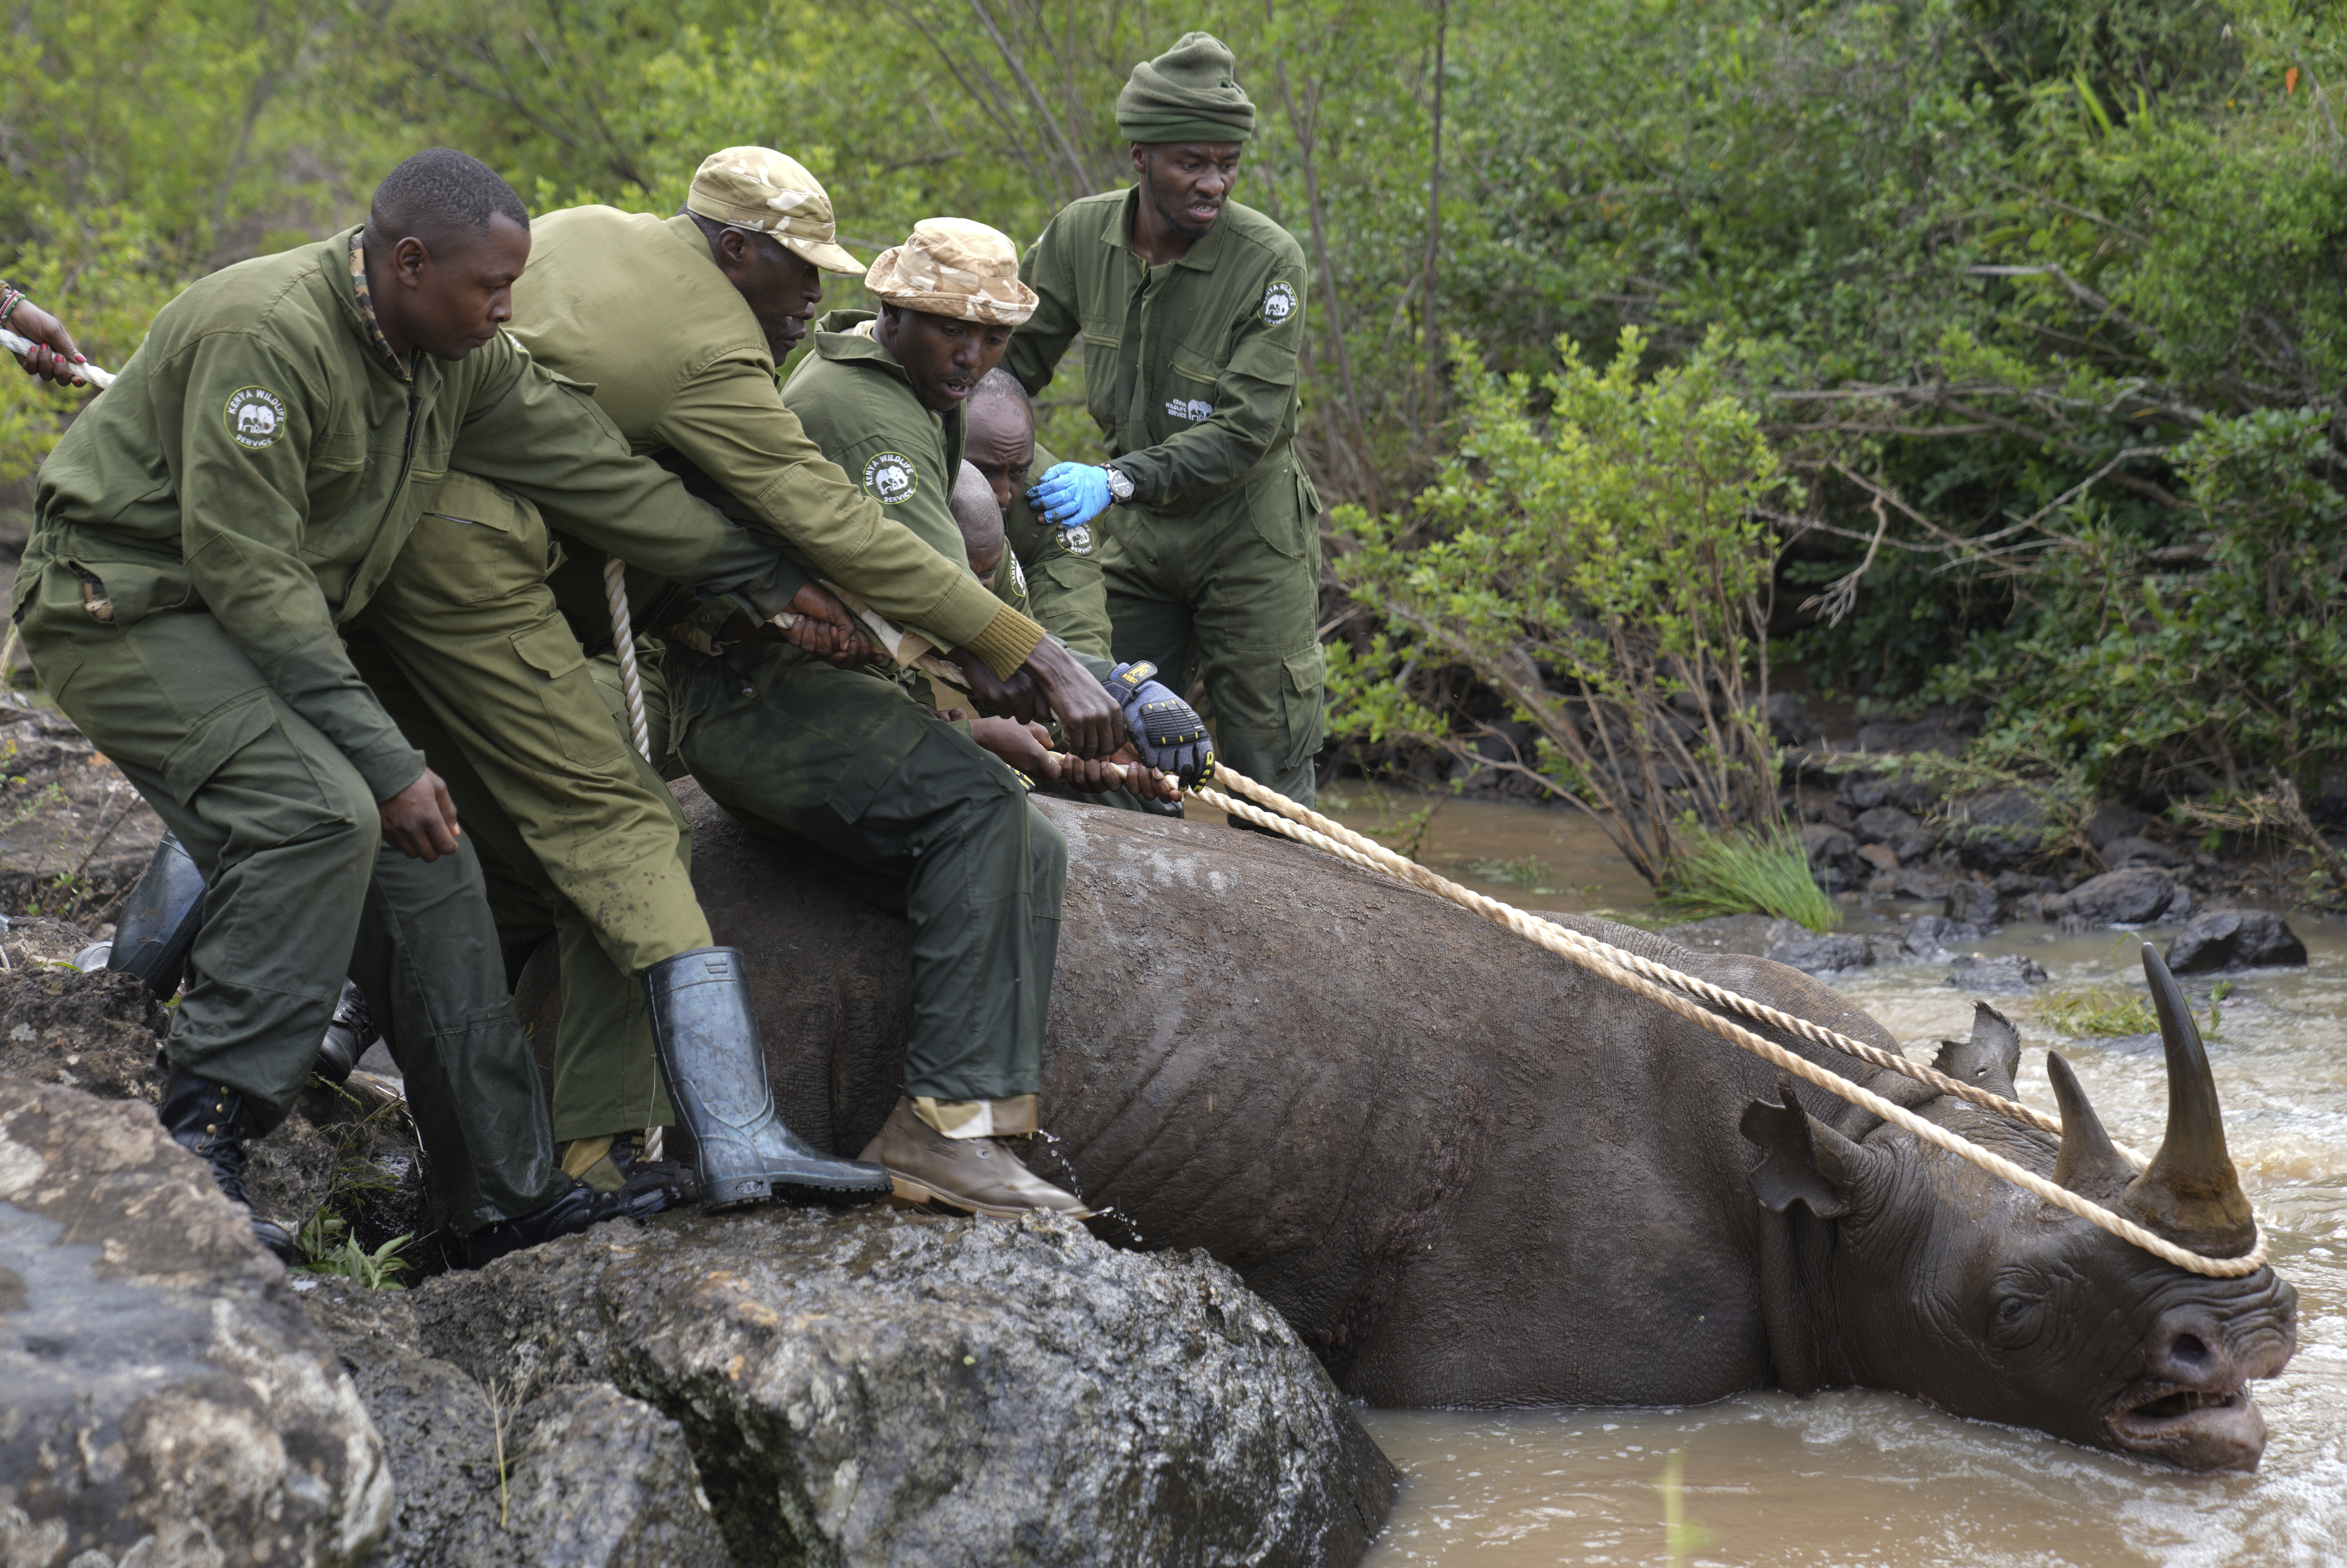 KENYA — Moving heavy wildlife… by hand: Kenya Wildlife Service rangers and capture team pull out a sedated black rhino from the water in Nairobi National Park, Kenya, Tuesday, Jan. 16, 2024. Kenya has embarked on its biggest rhino relocation project ever and began the difficult work Tuesday of tracking, darting and moving 21 of the critically endangered beasts, which can each weigh over a ton, hundreds of miles in trucks to a new home. A previous attempt at moving rhinos in the East African nation in 2018 was a disaster as all 11 of the animals died.Photo: Brian Inganga/AP